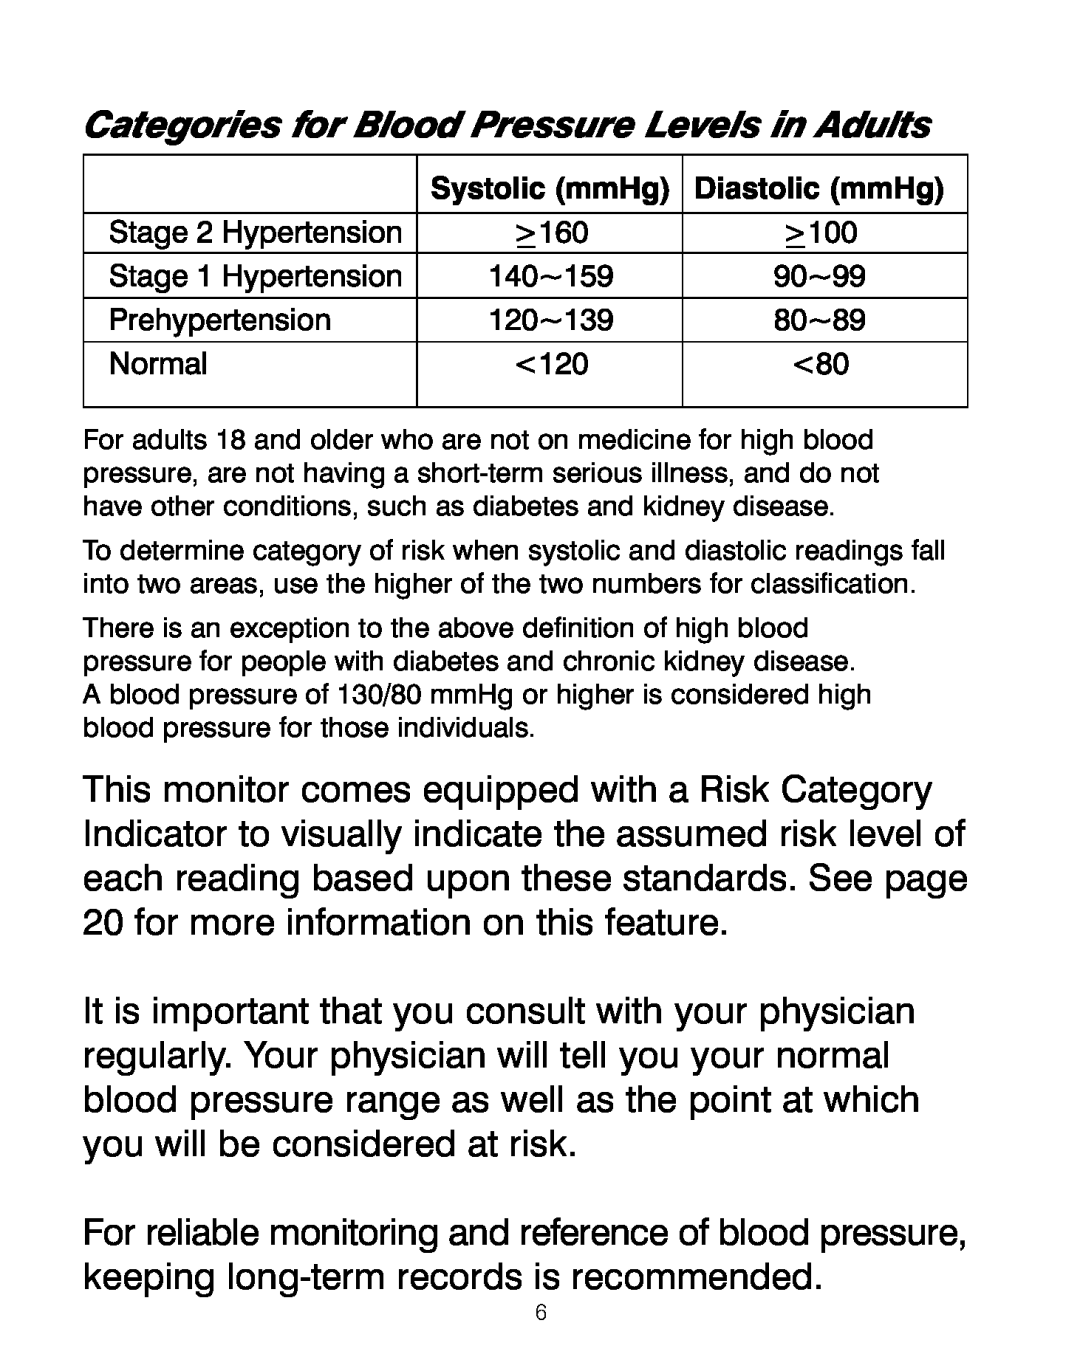 HoMedics BPA-200 manual Categories for Blood Pressure Levels in Adults 